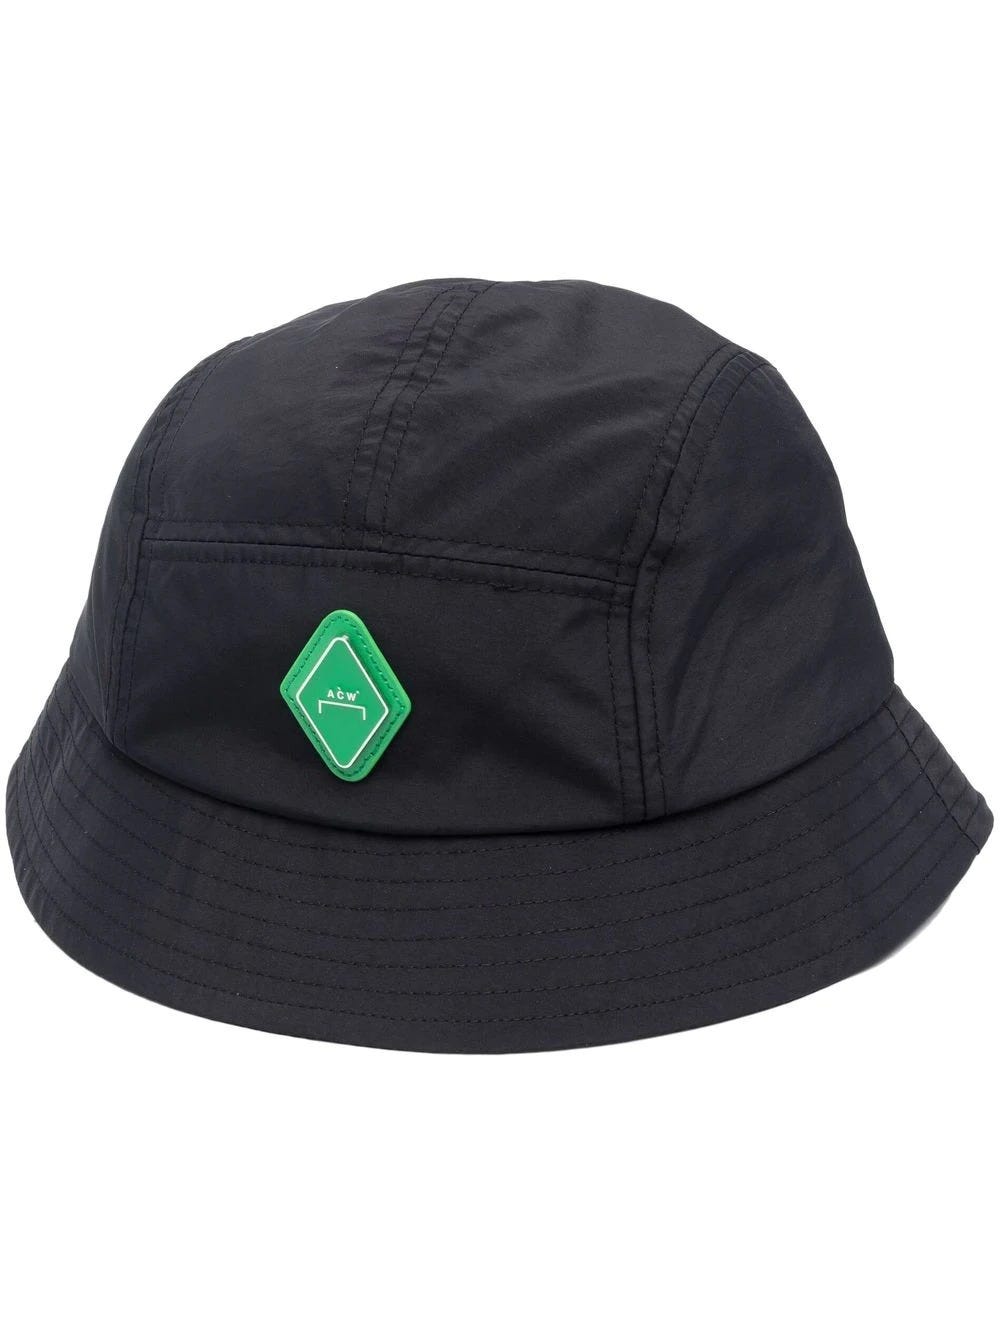 A-COLD-WALL* BLACK BUCKET HAT WITH APPLICATION